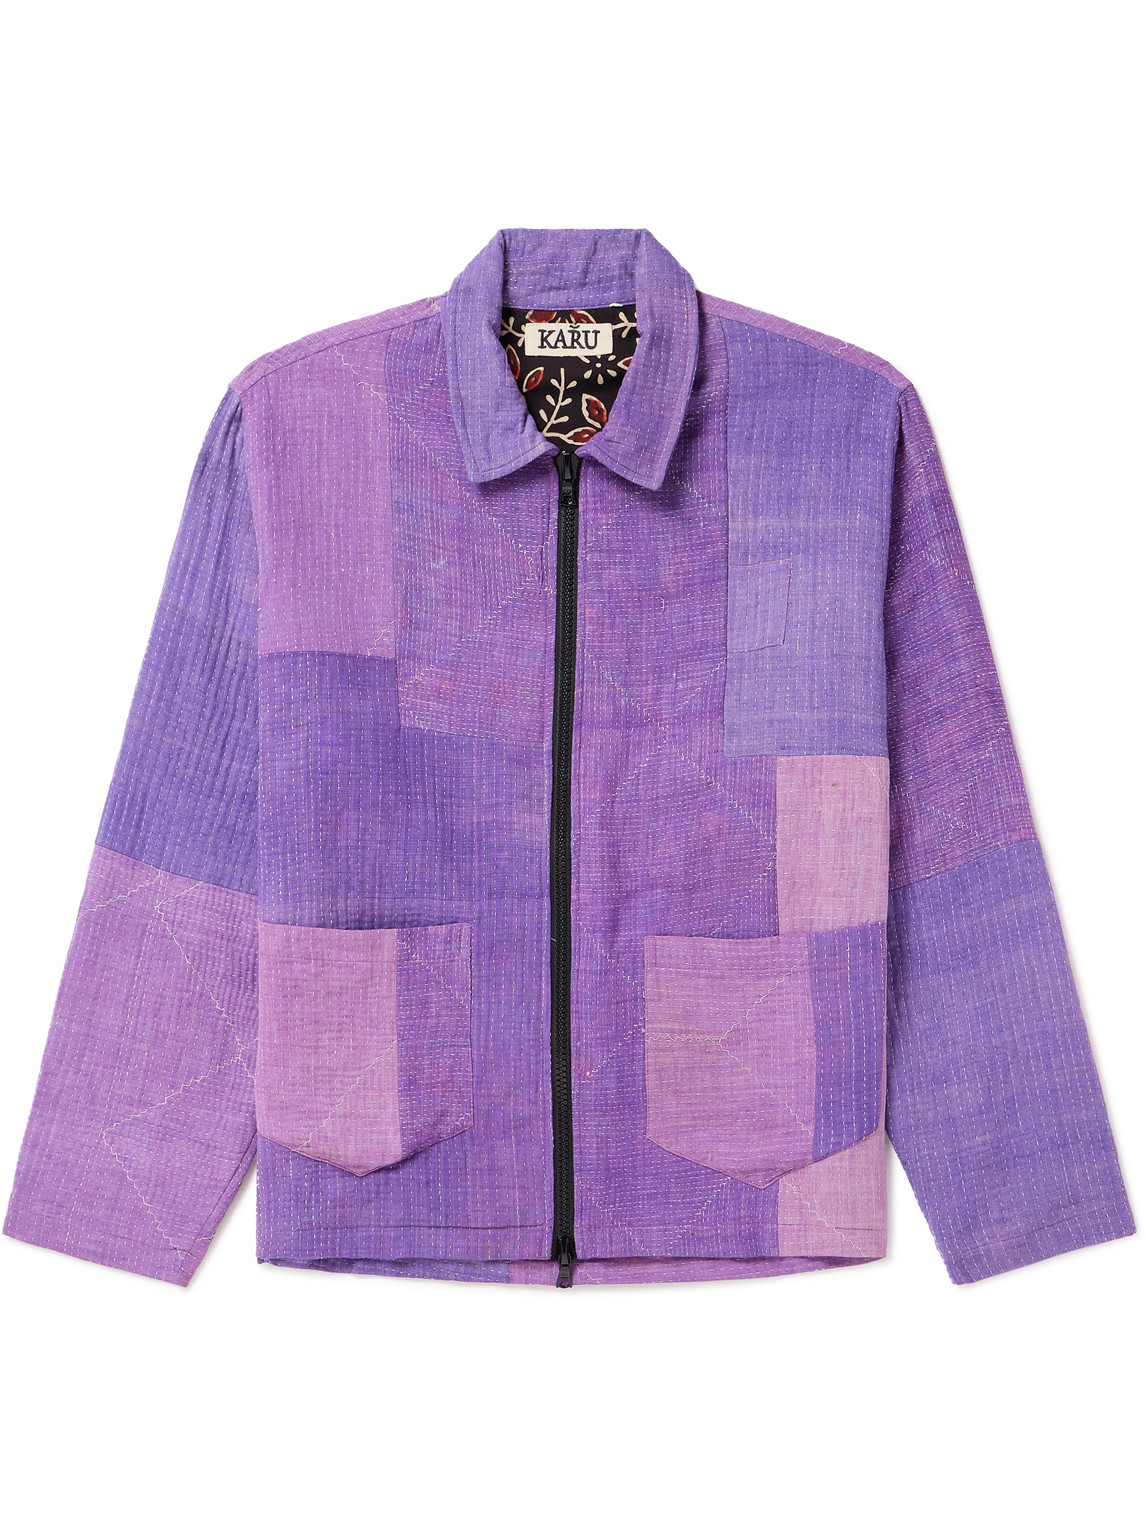 Throwing Fits Patchwork Embroidered Cotton Jacket